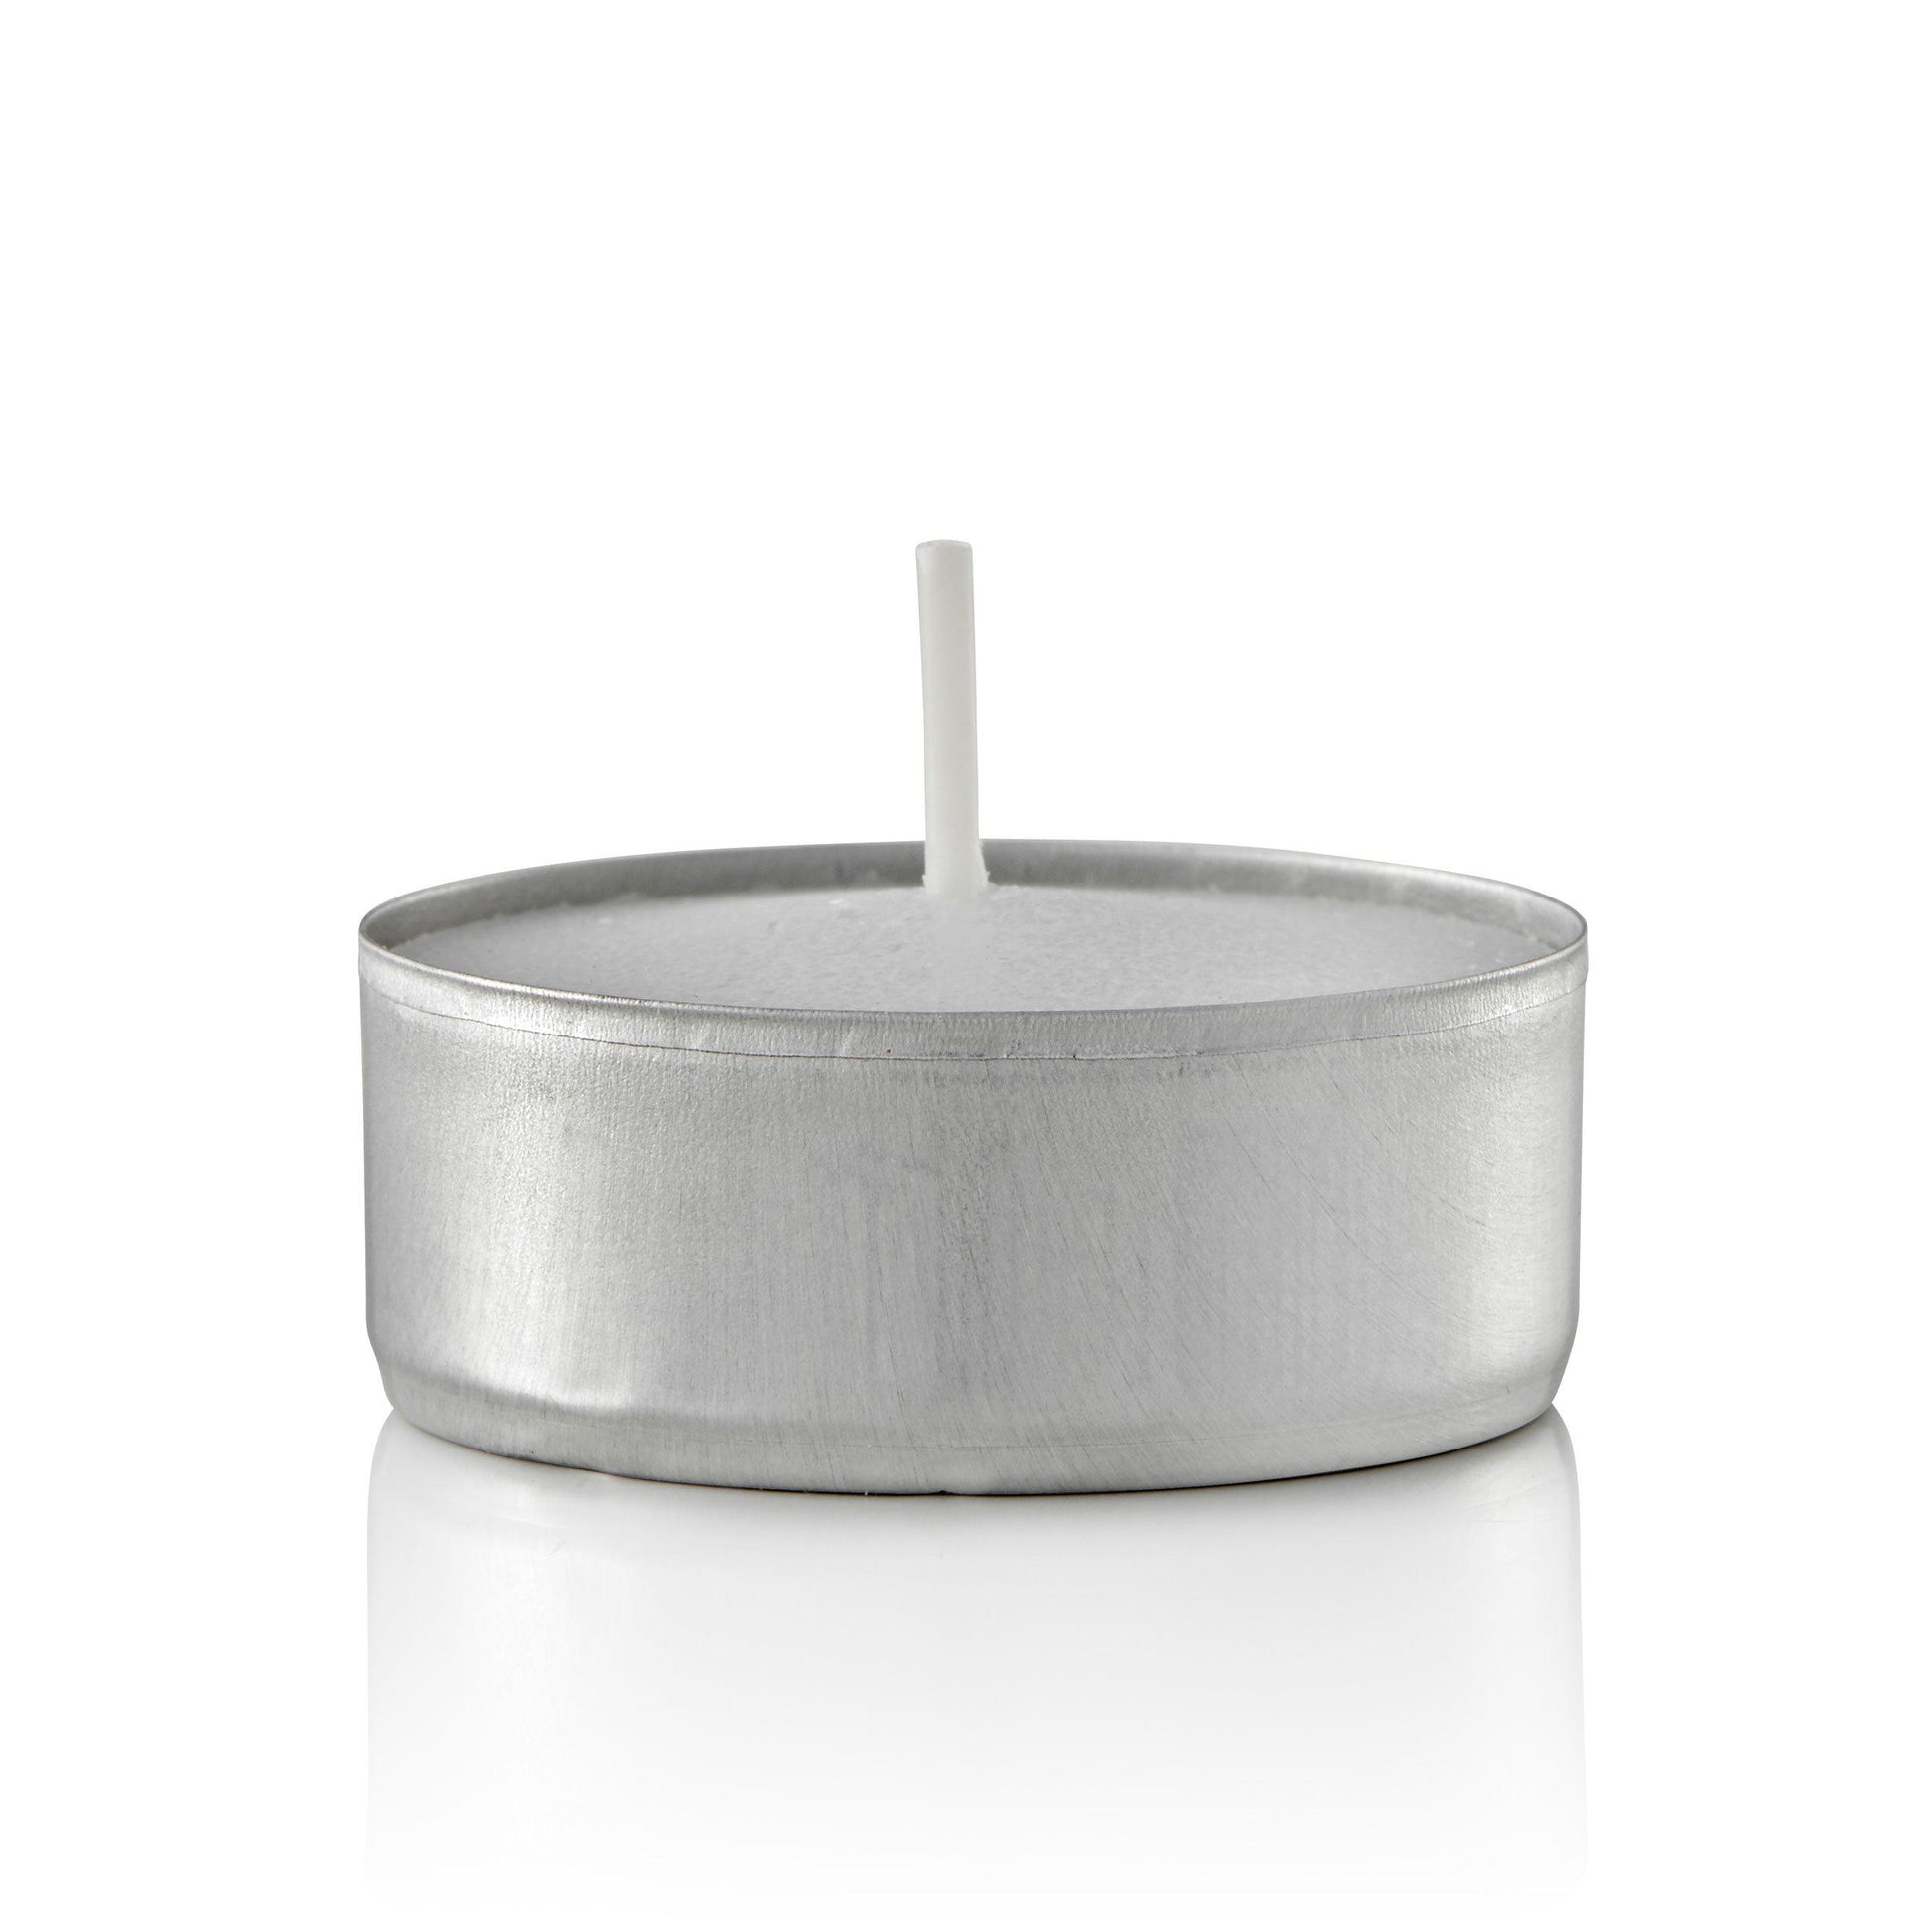 10 Pack Boxed Tealight Candles in Metal Cups, White, Unscented, 500 Total-tealight candles-TableTopLighting.com